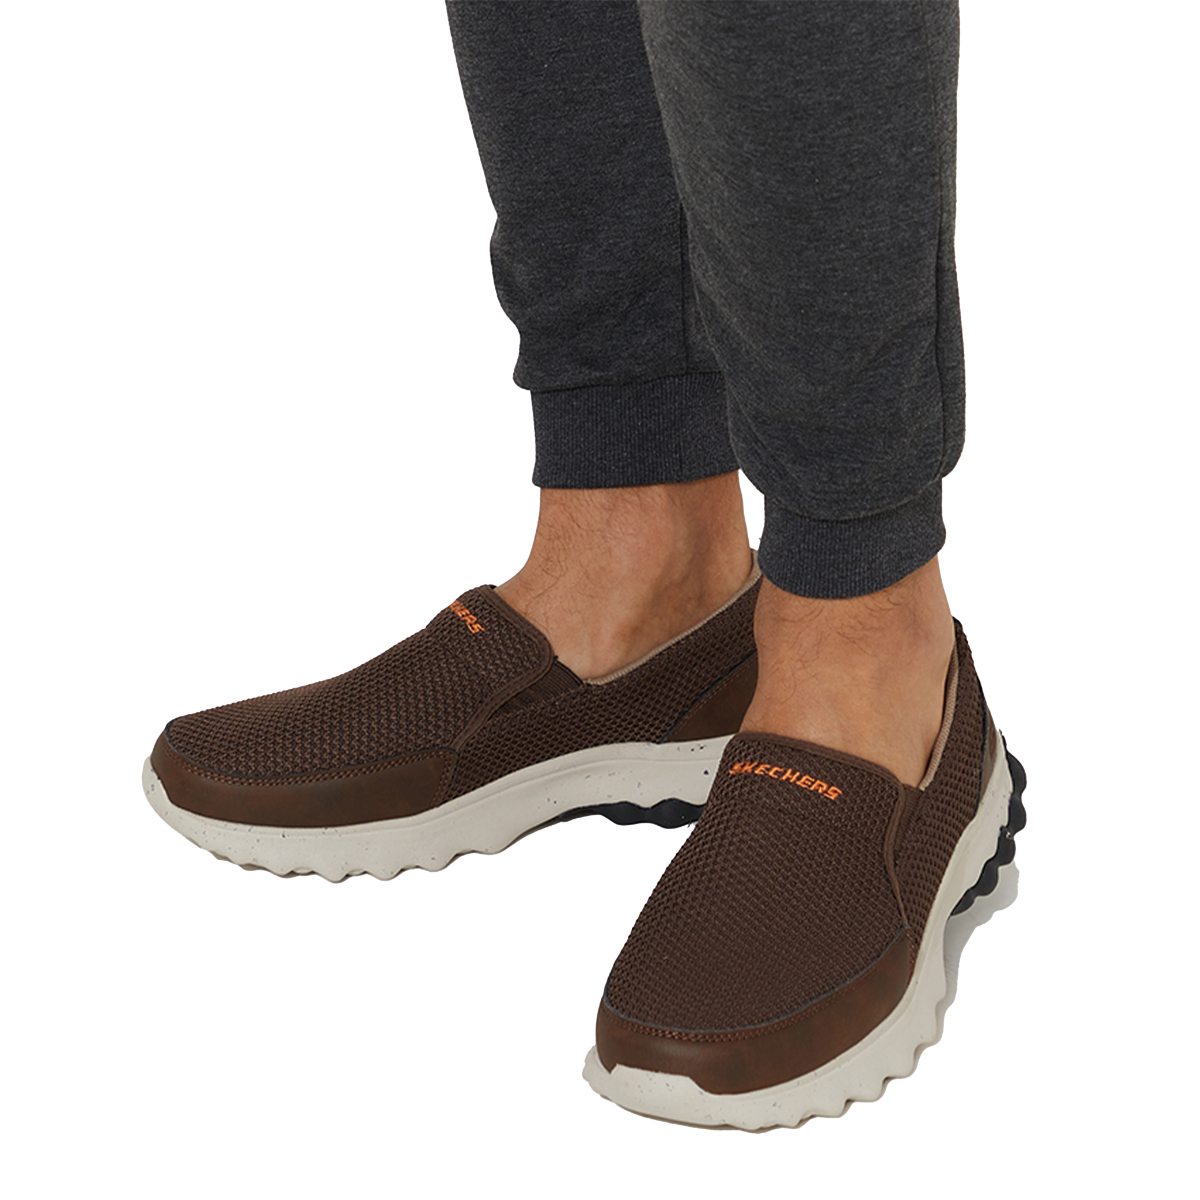 Skechers Voston Lifestyle Shoes For Men, Brown